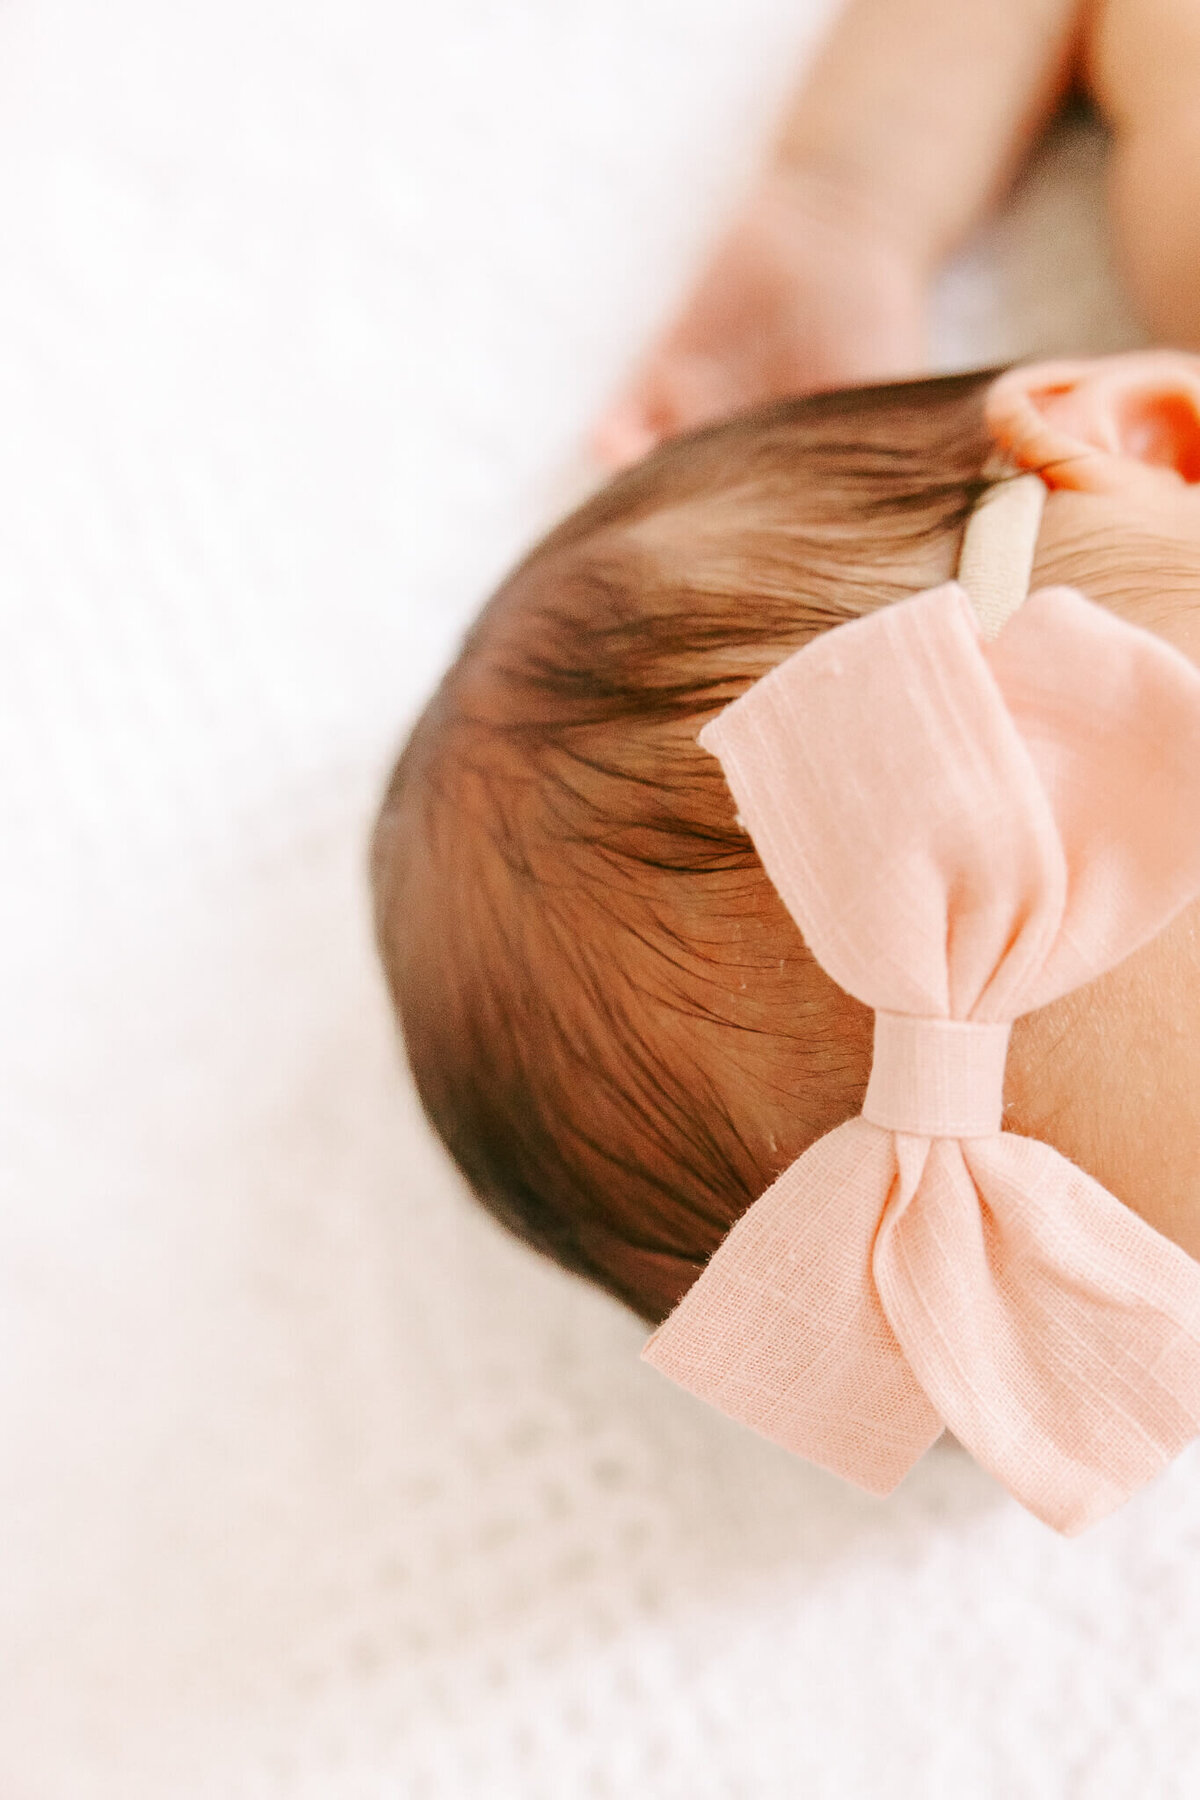 Baby's head with pink bow